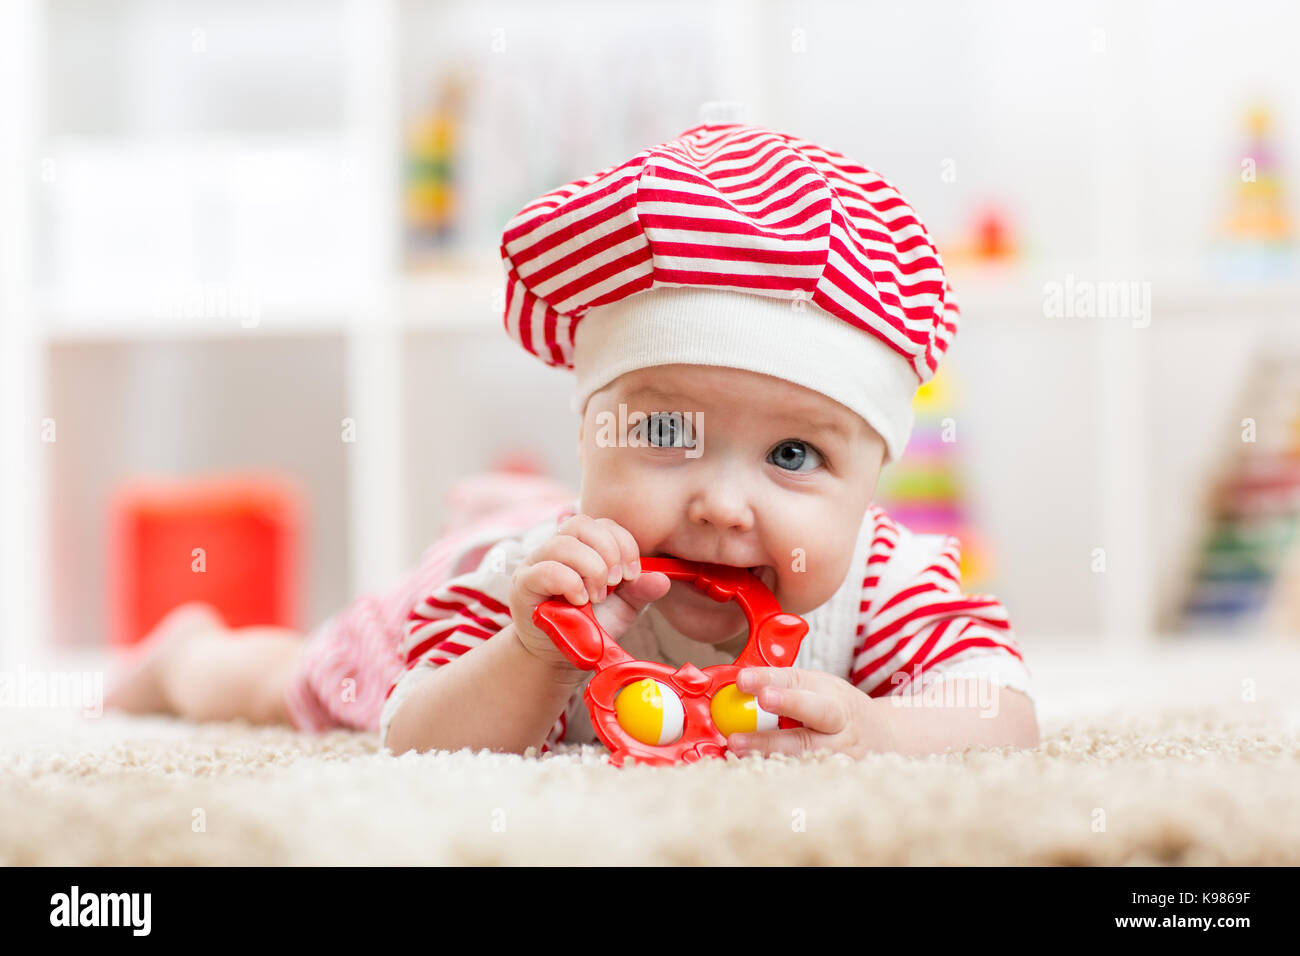 Child girl weared costue biting a toy lying on a carpet at home Stock Photo